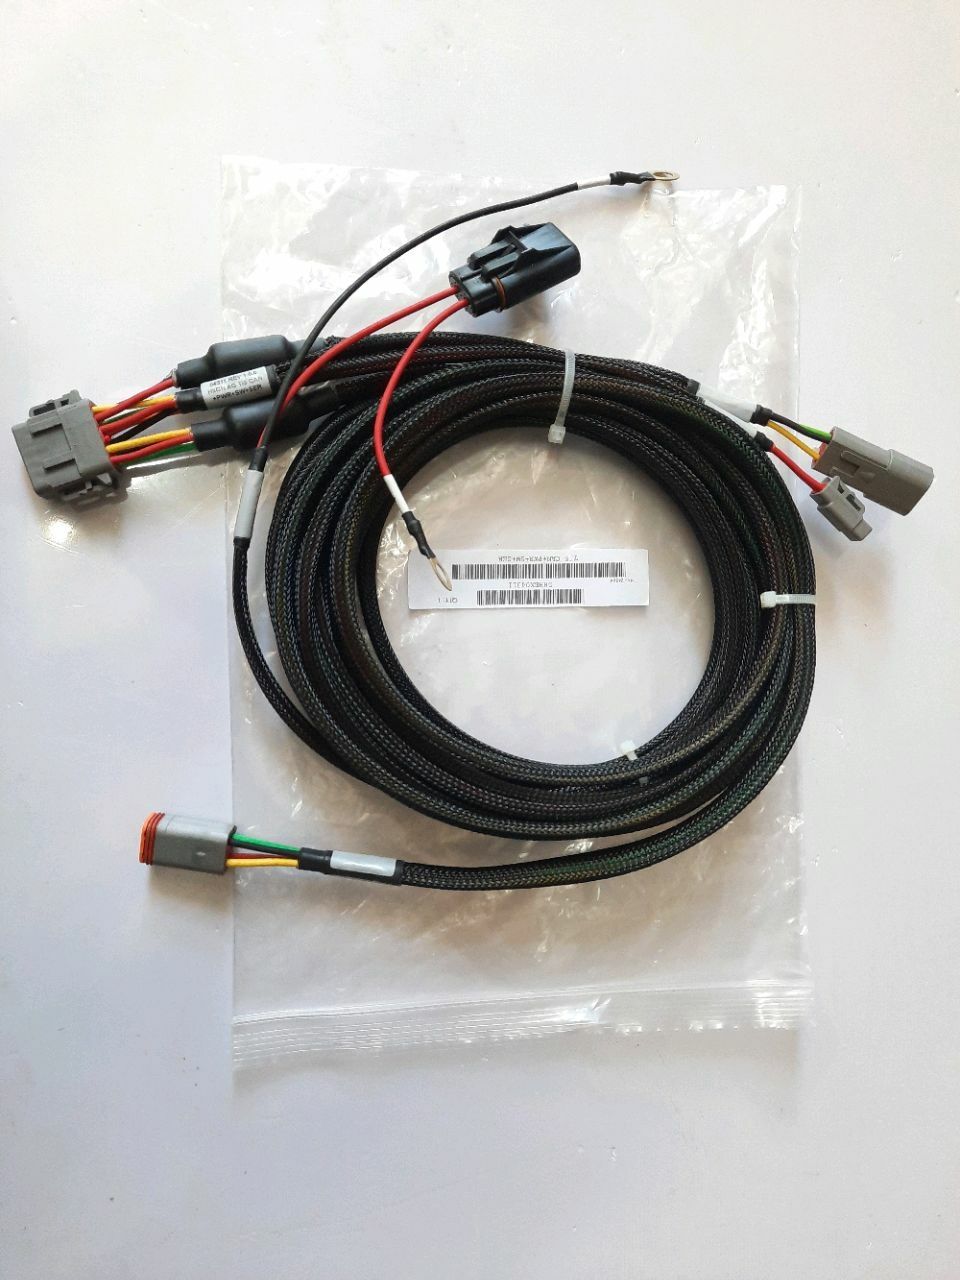 Ti5 cable+can+power+switch